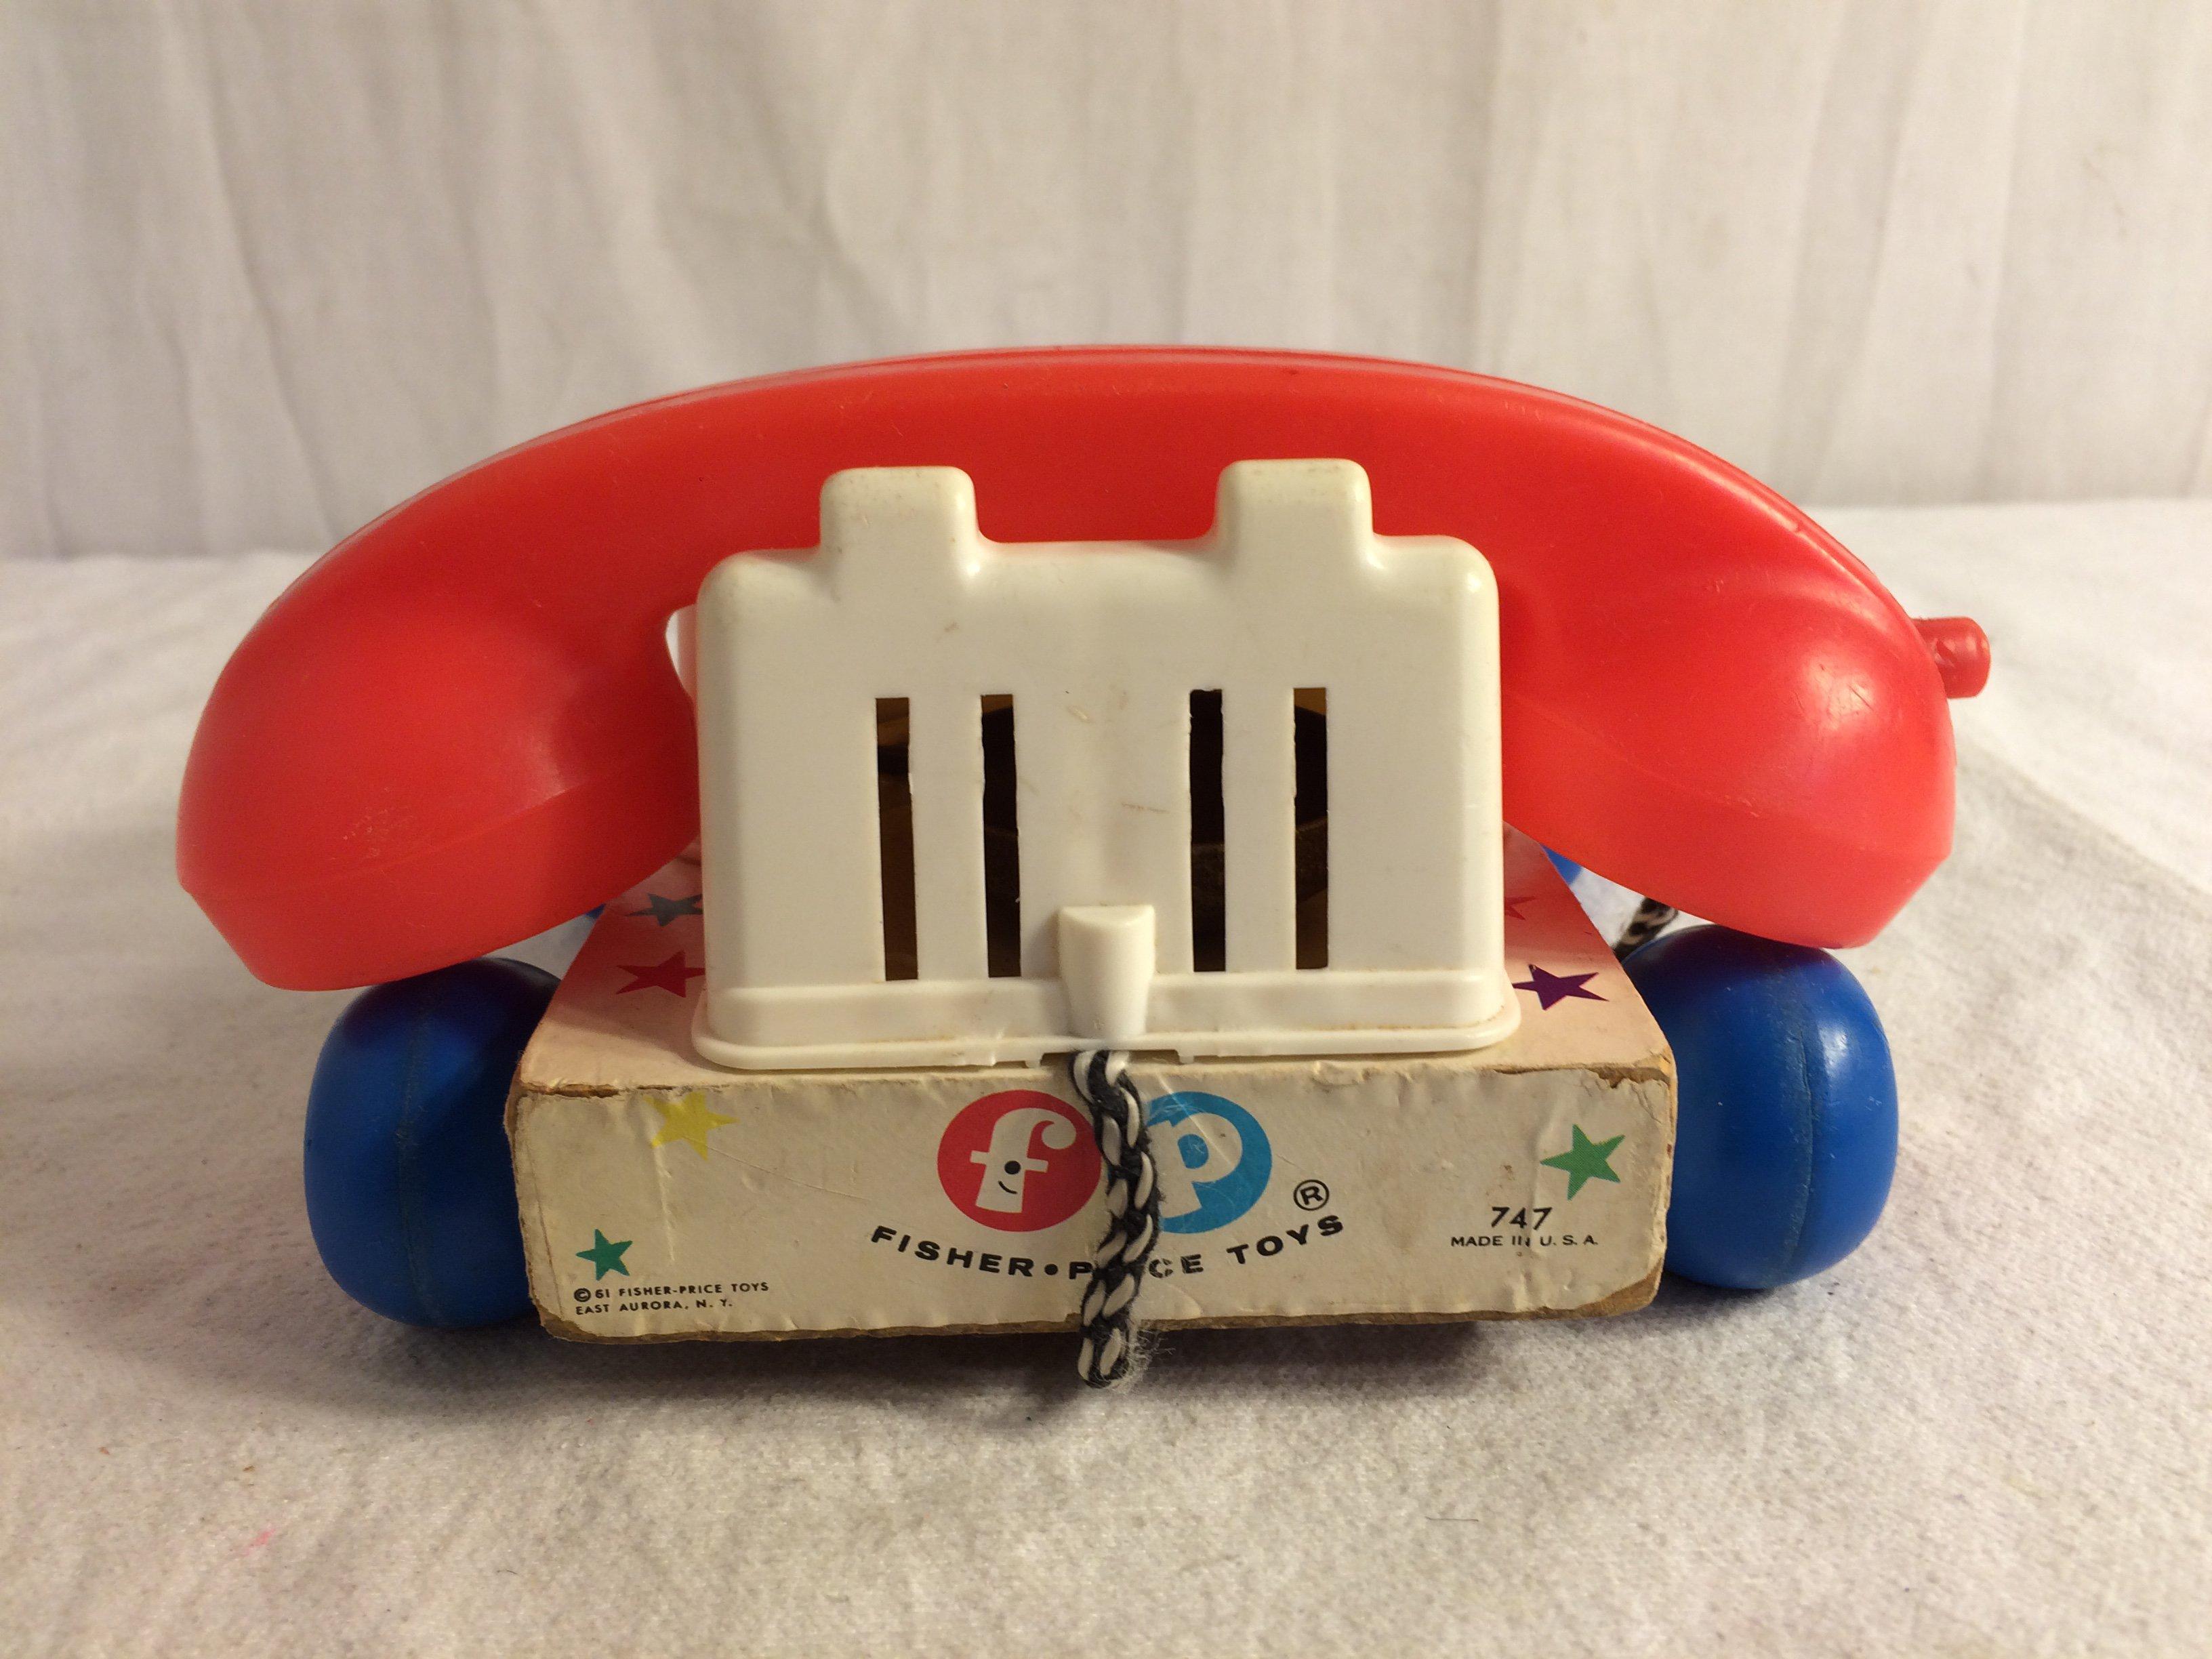 Collector Vintage 1961 Fisher Price Toys Hatter Telephone No.747 Size:6-7" by 4"